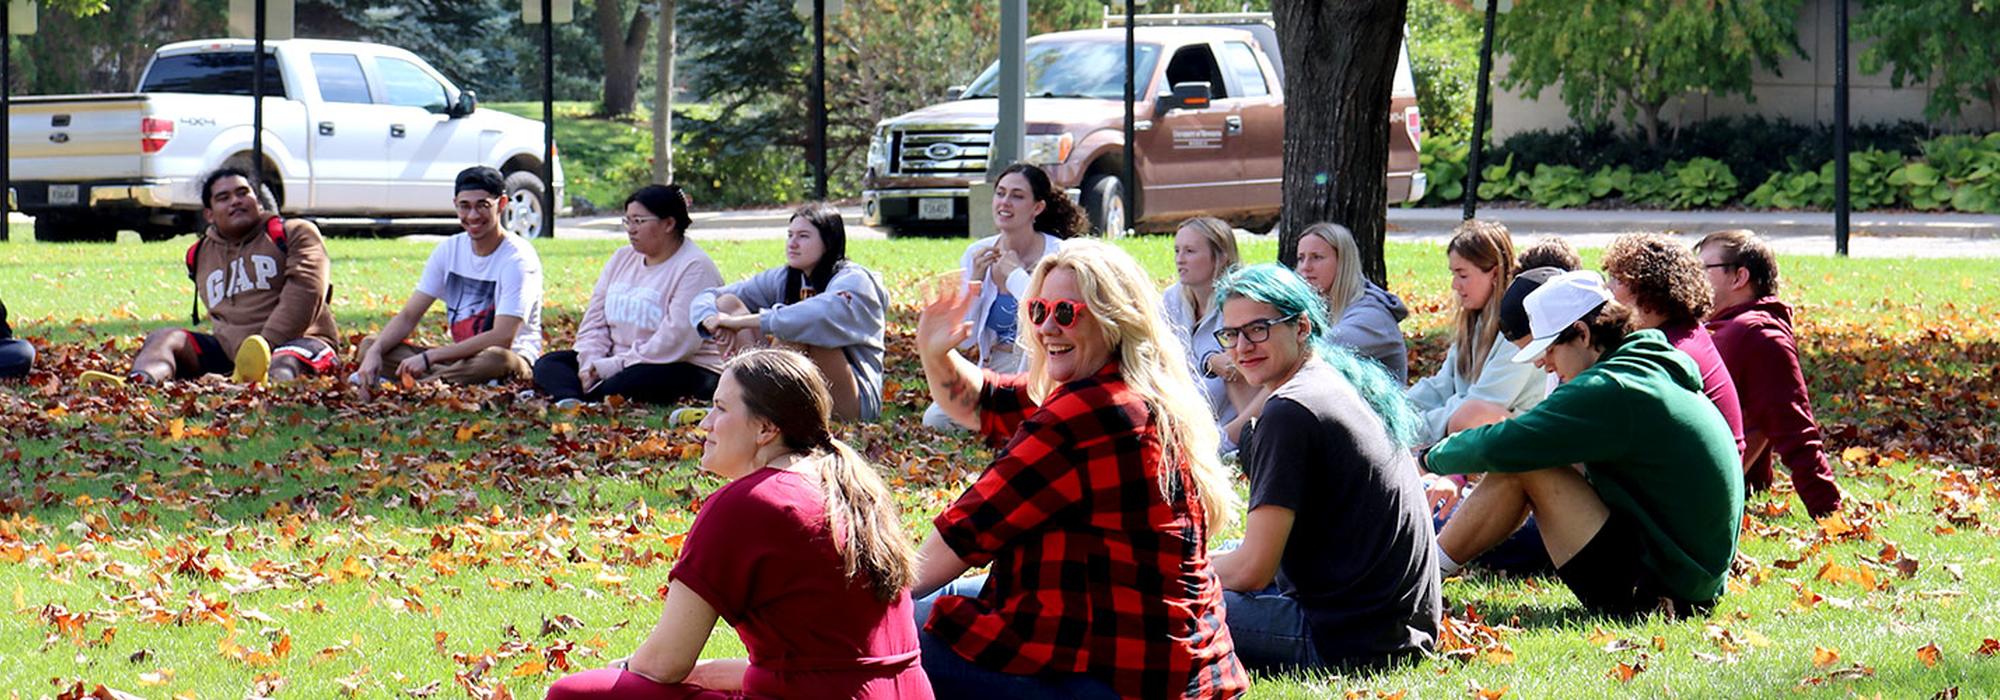 A psychology class meets outdoors on a bright fall day